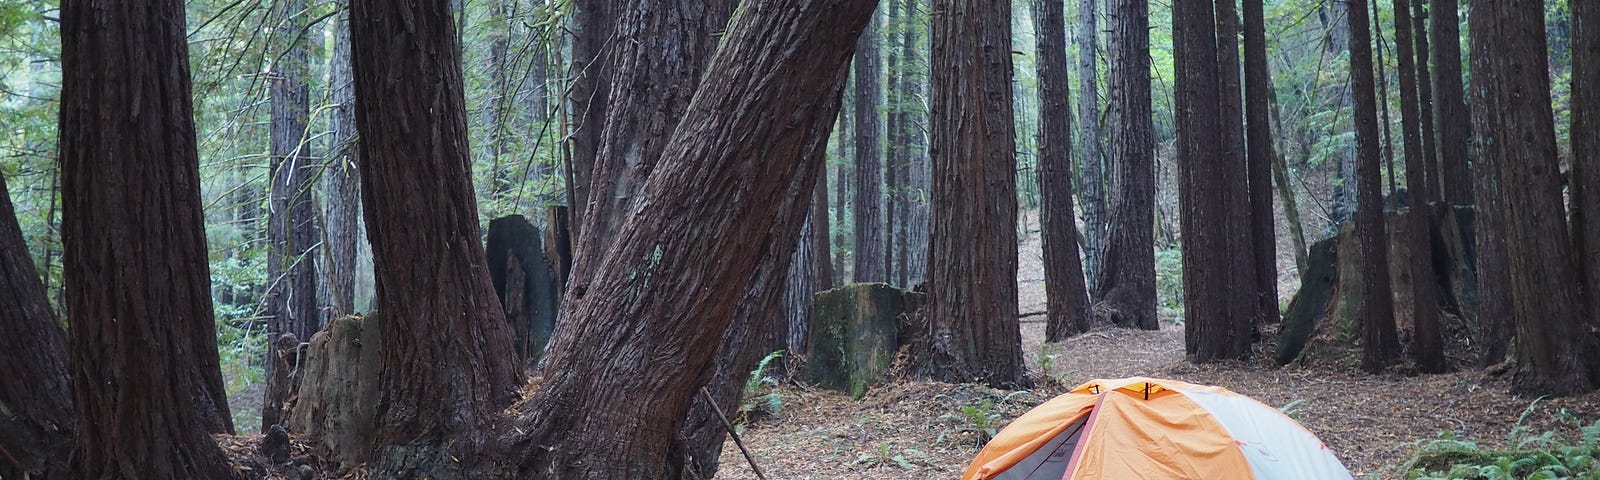 Our two-person tent nestled among trees at our favorite campsite in Humboldt County.